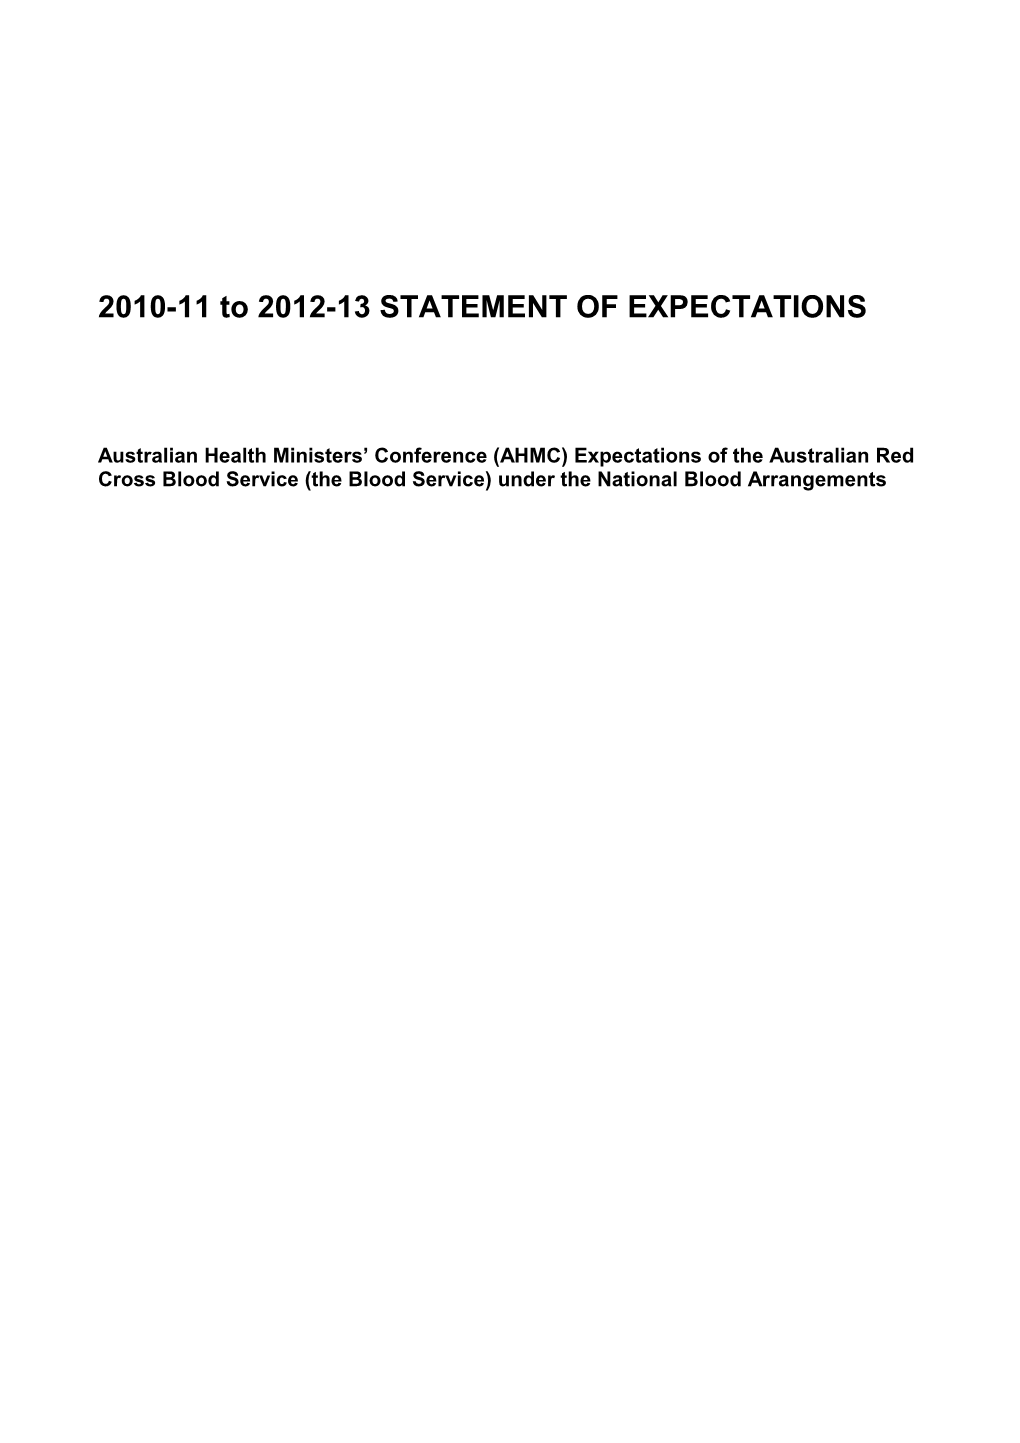 Statement of Expectations/Priorities for 2010-11 and 2011-12